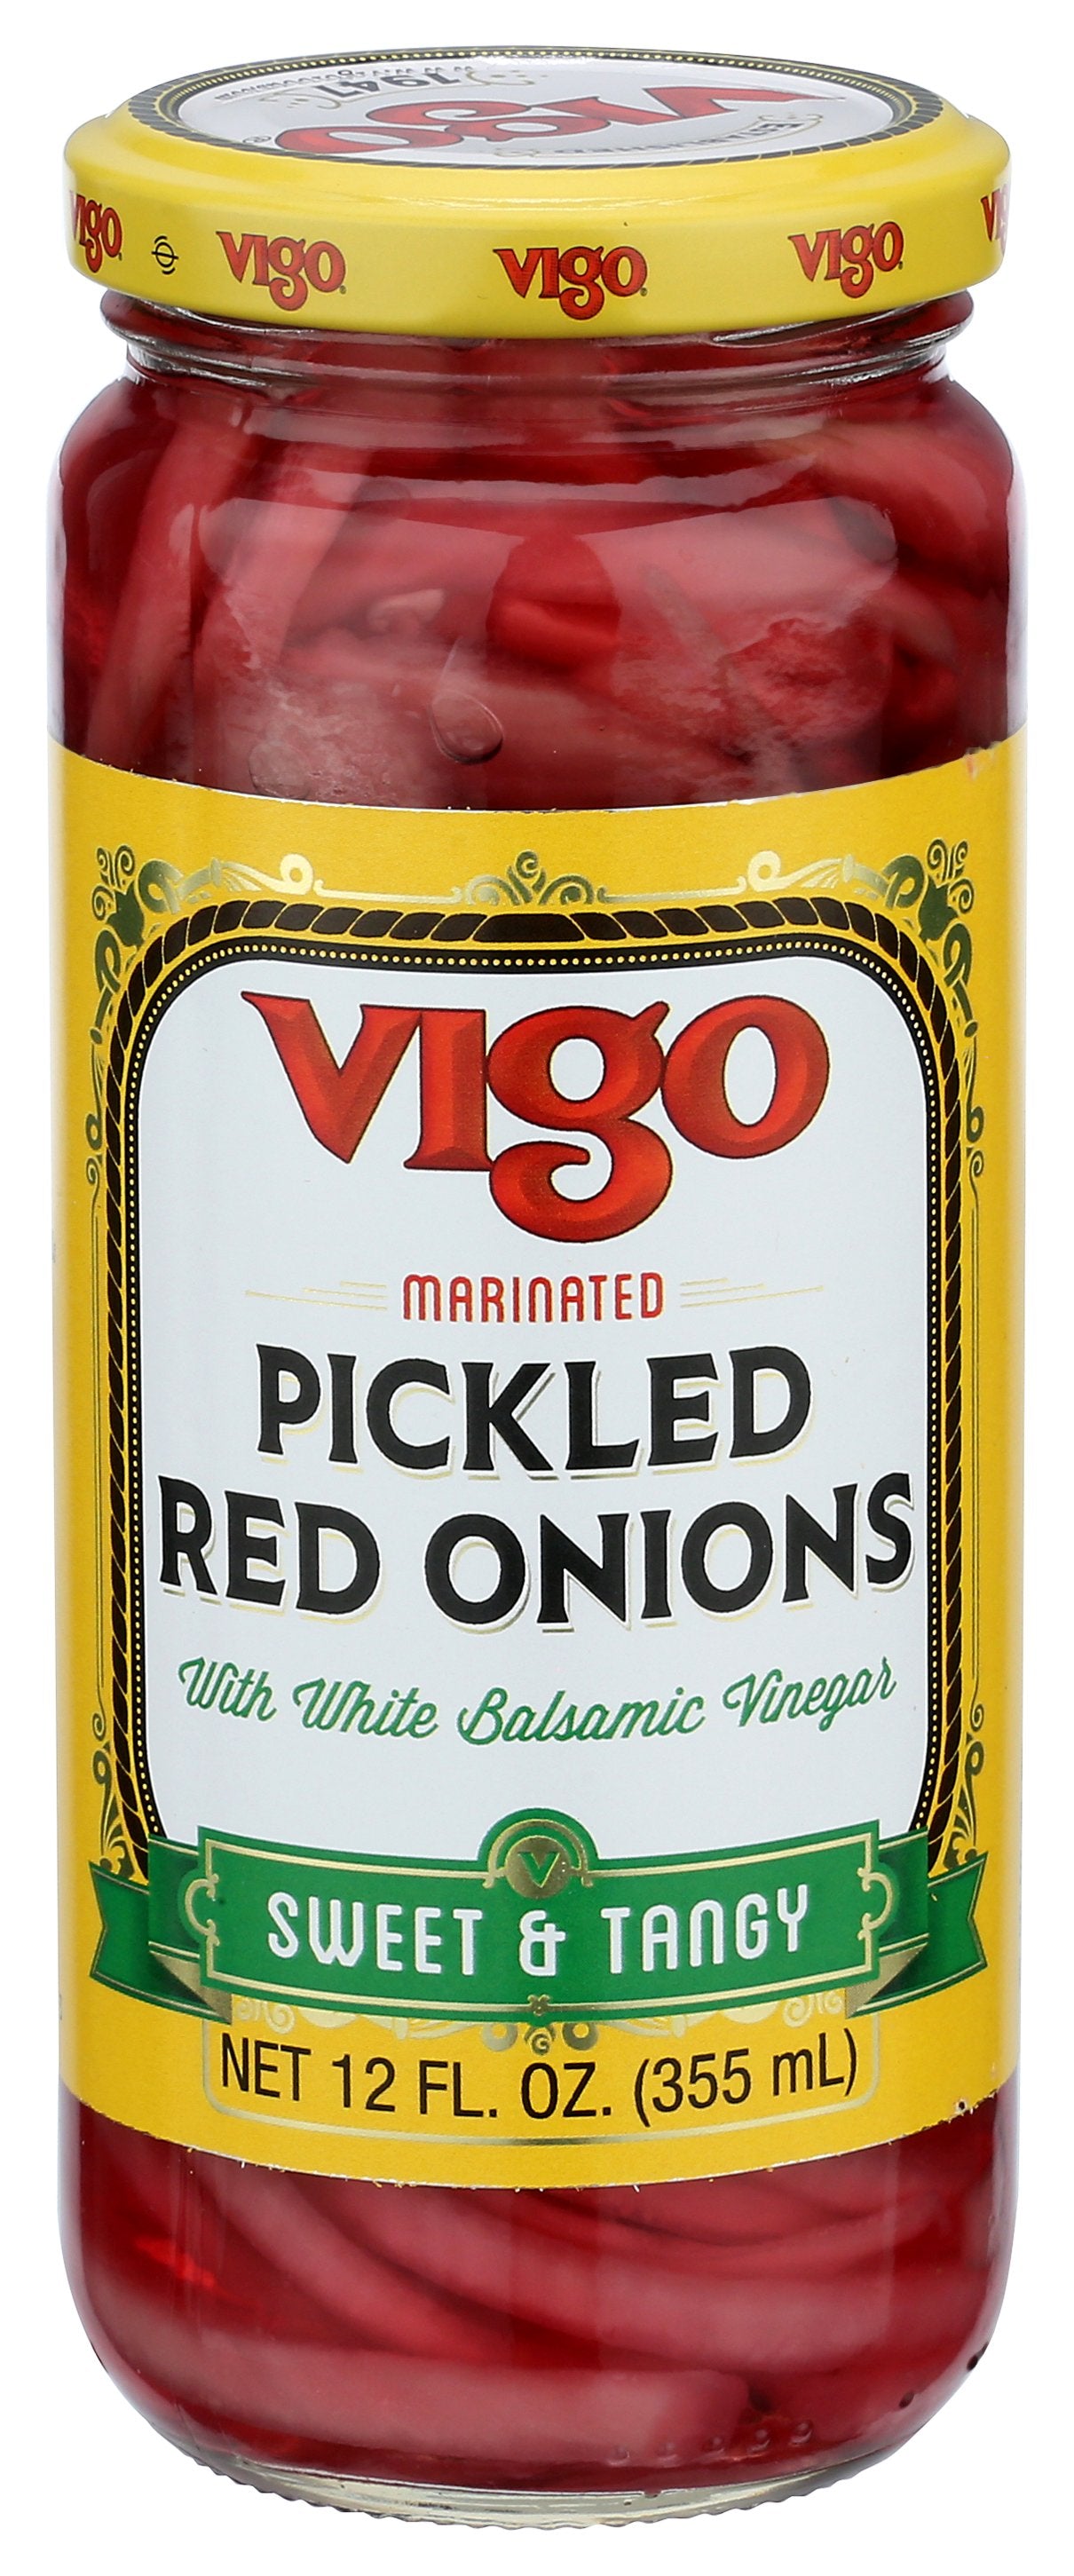 VIGO ONIONS PICKLED RED - Case of 6